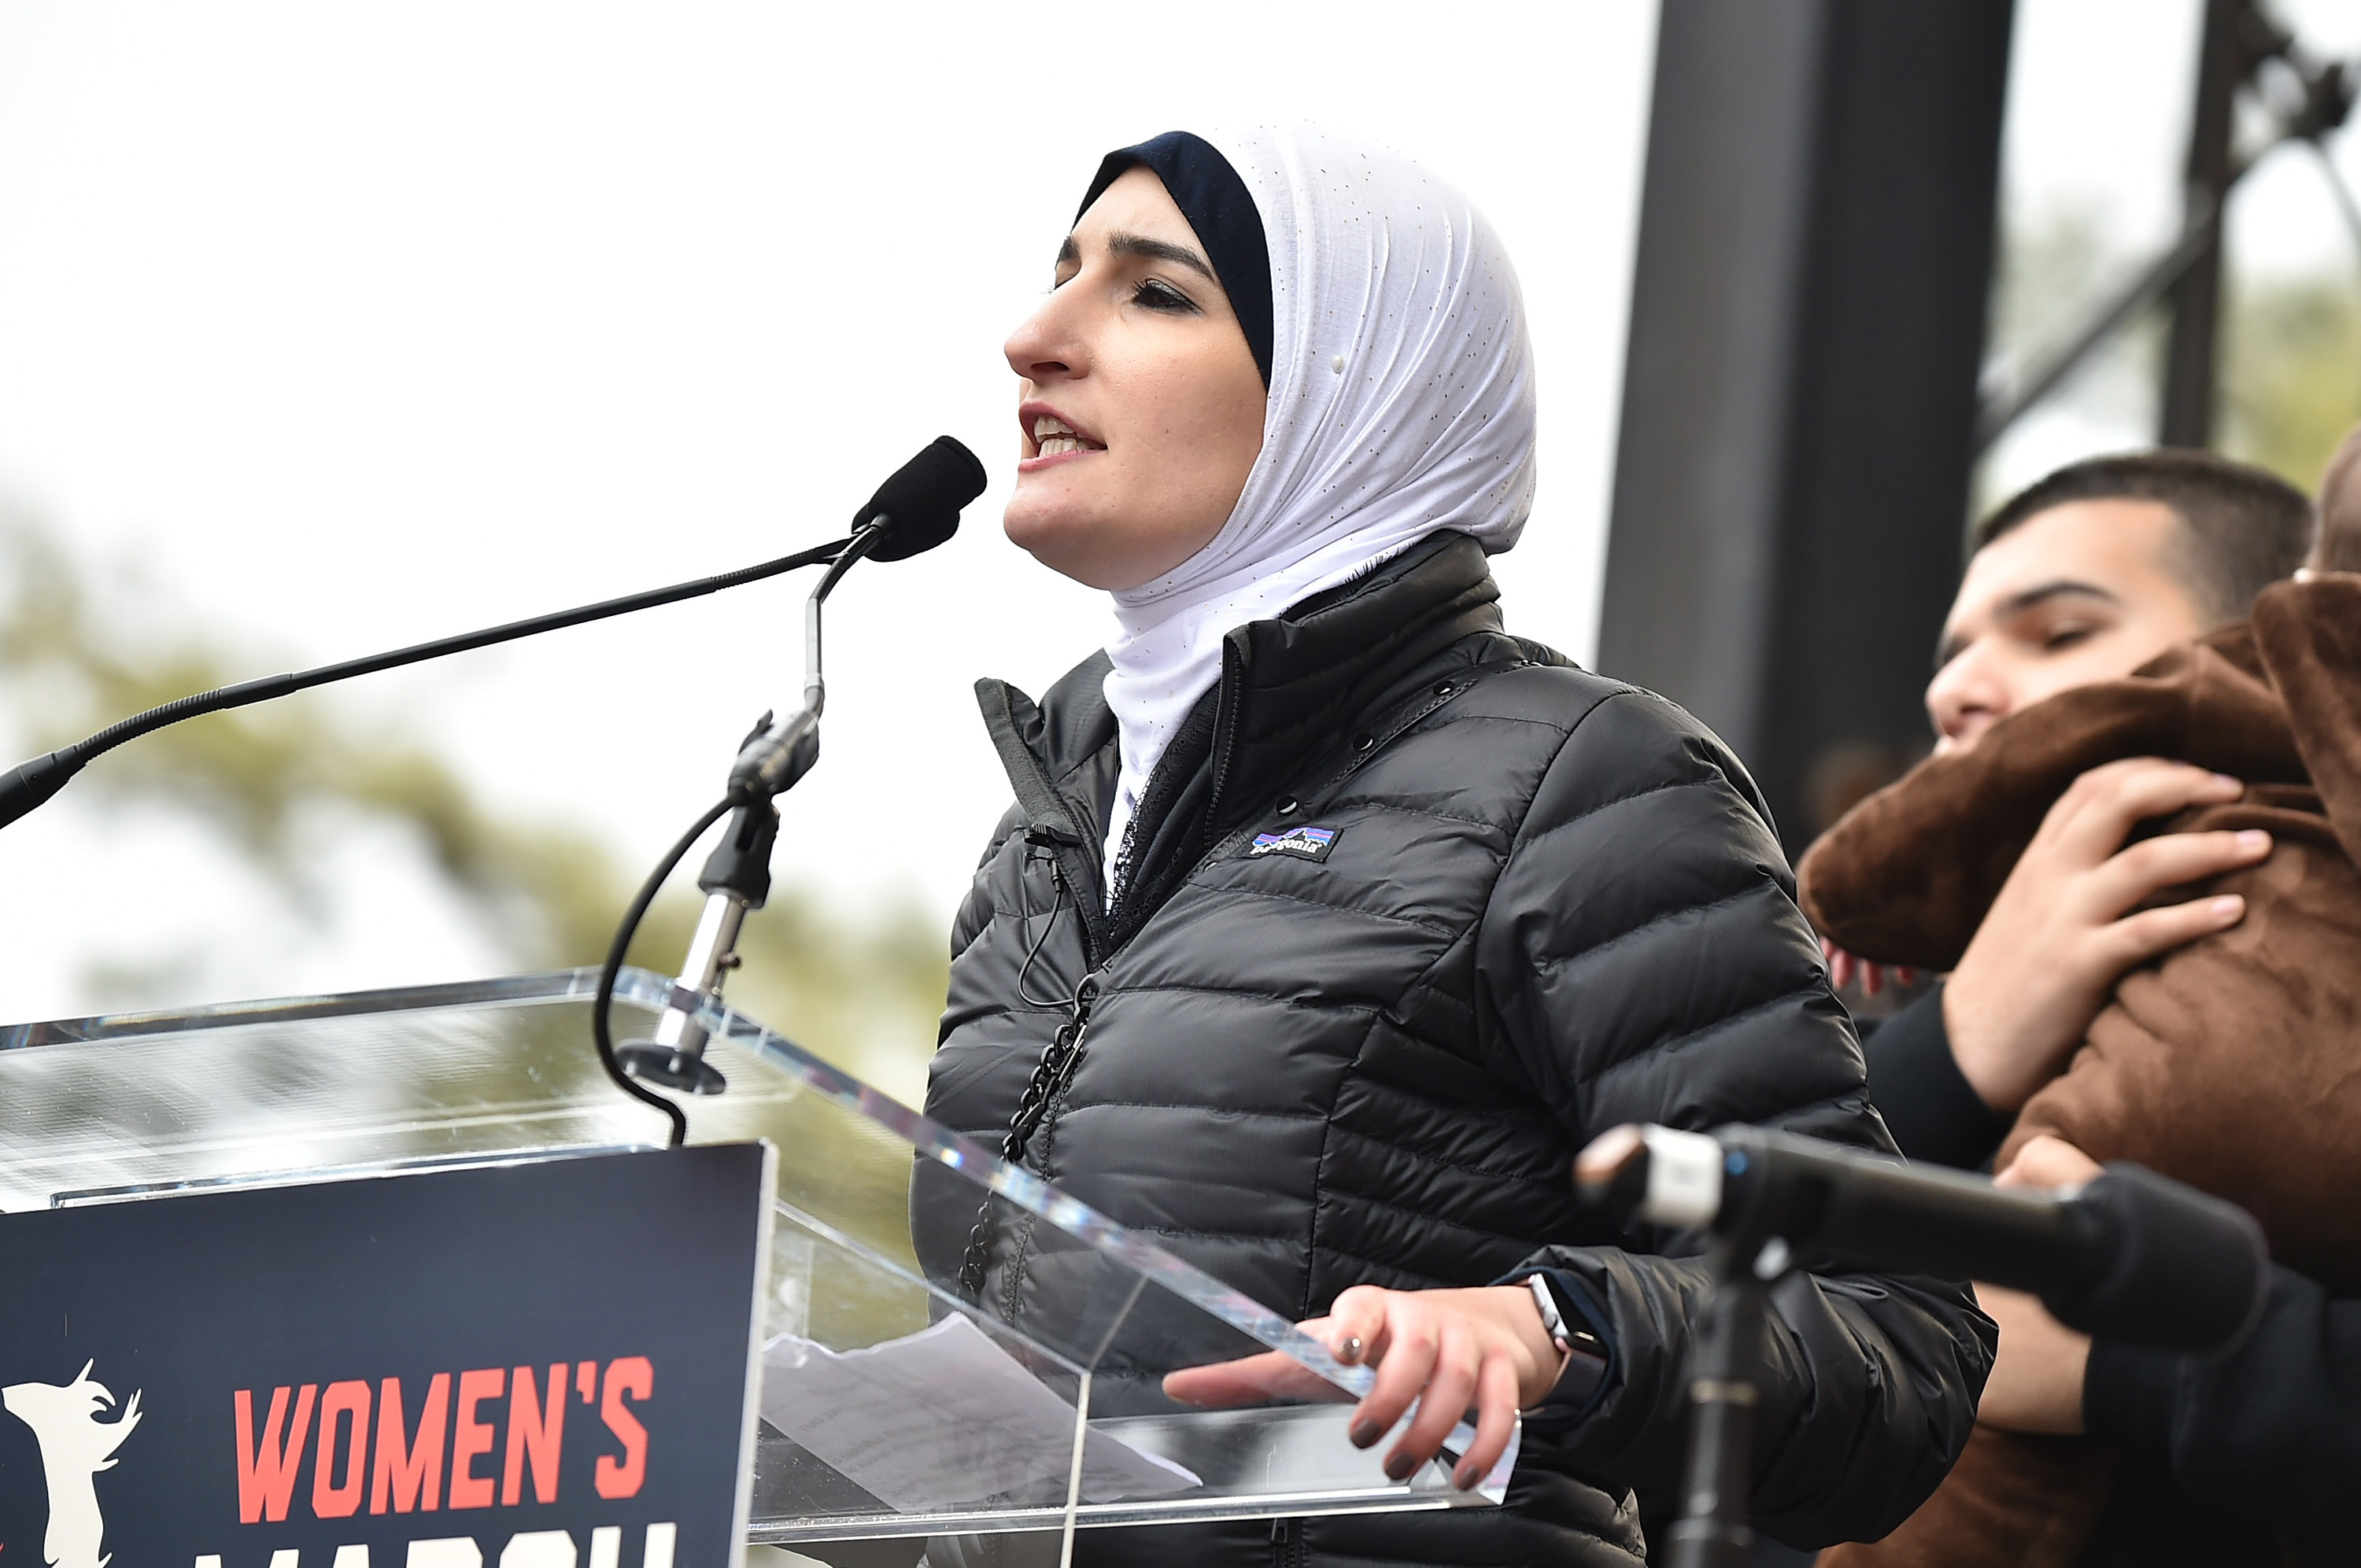 Linda Sarsour speaks onstage during the Women's March on Washington on January 21, 2017 in Washington, DC. (Theo Wargo—Getty Images)